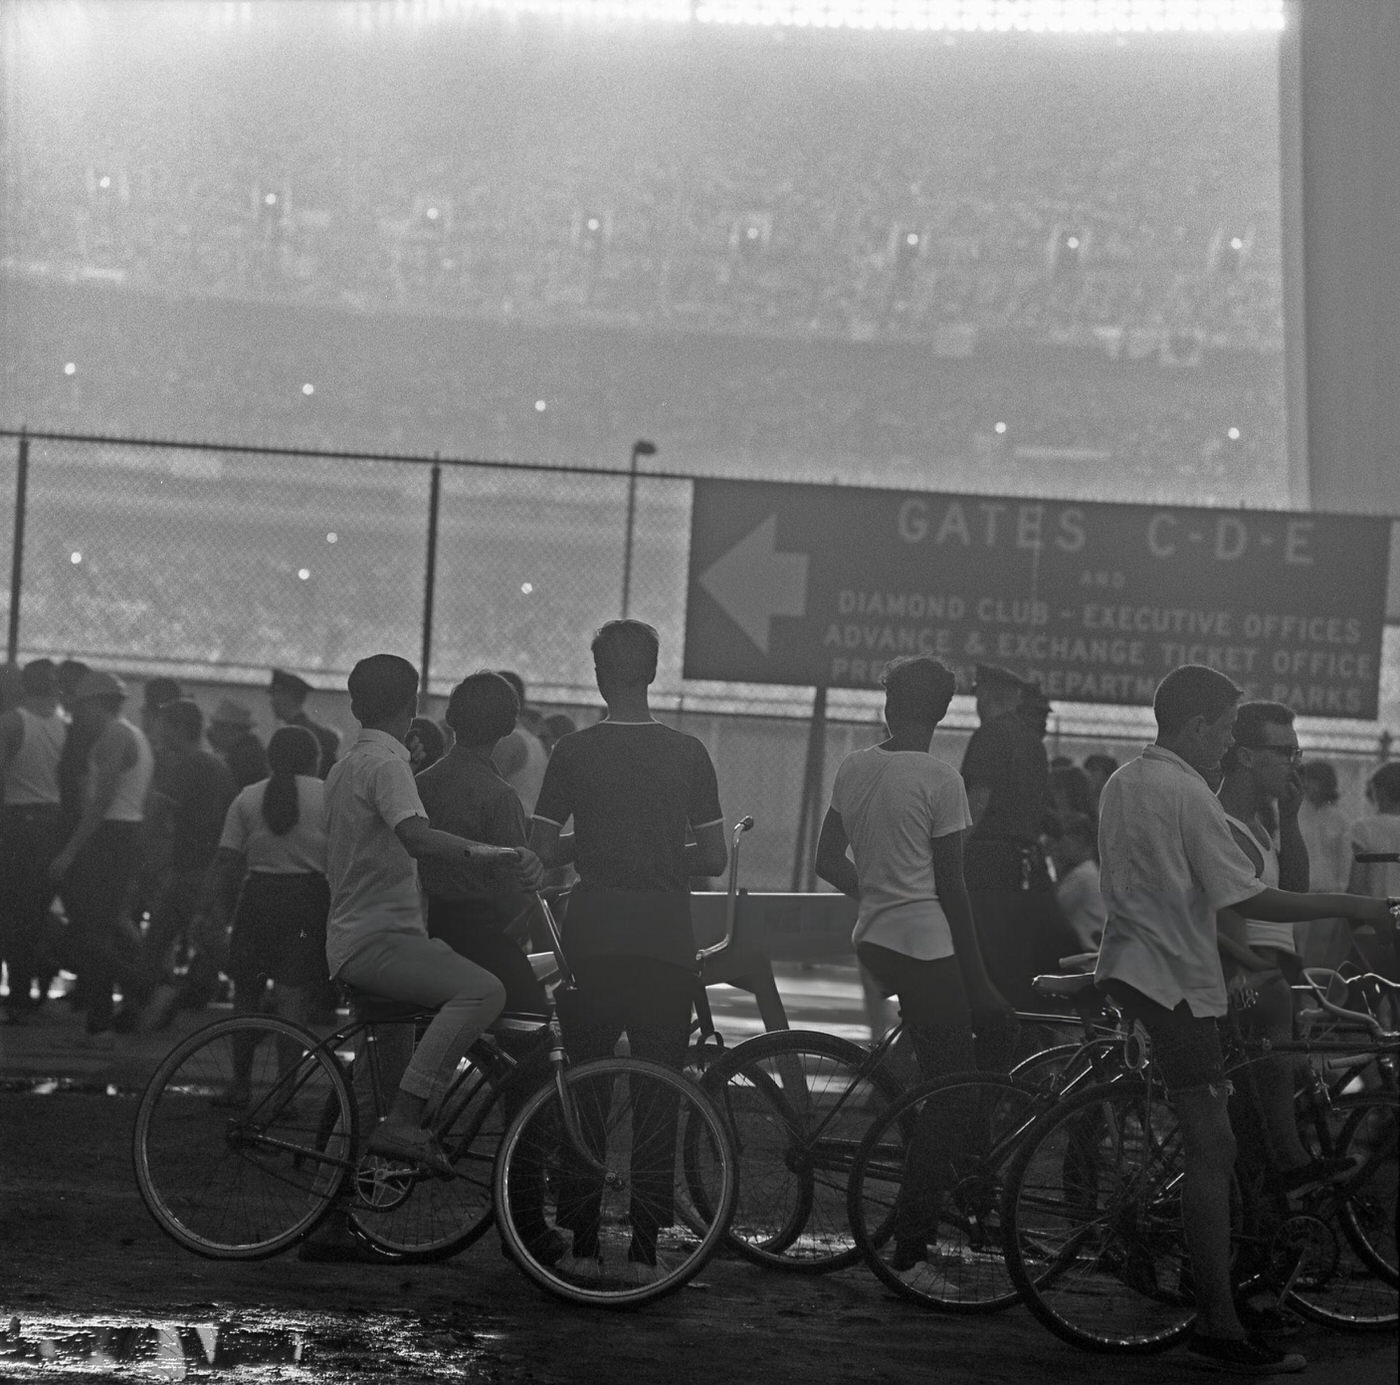 Young Fans On Their Bicycles Try To Catch A Glimpse Of The Beatles Over A Fence Outside Shea Stadium, 1966.